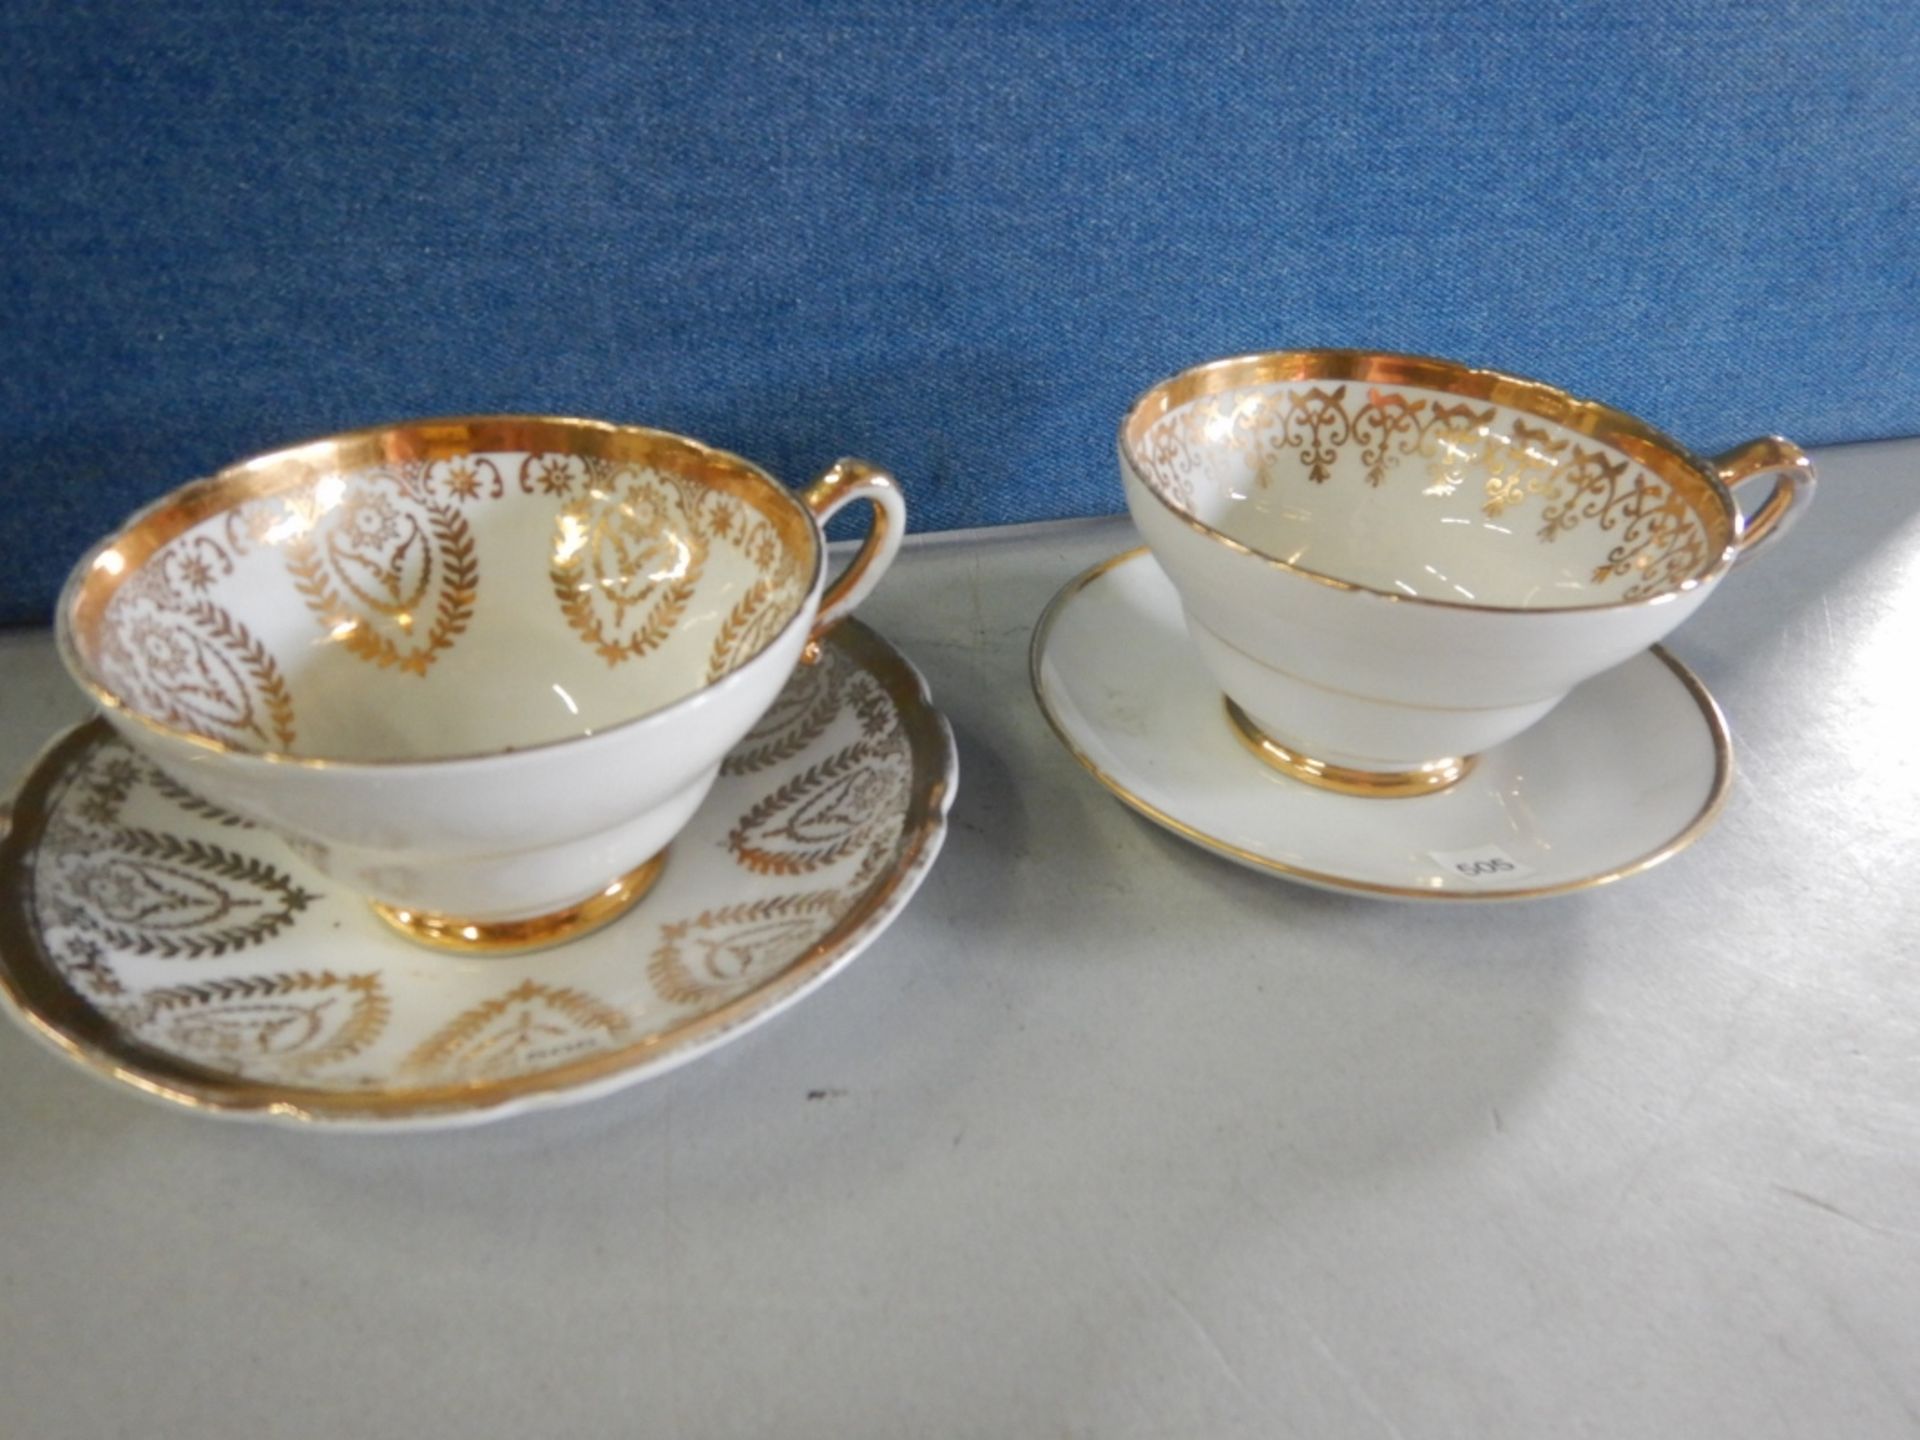 ANTIQUE TEACUPS & SAUCERS - MADE IN ENGLAND - LOT OF 2 - FINE BONE CHINA EST. 1875 "STANLEY" -